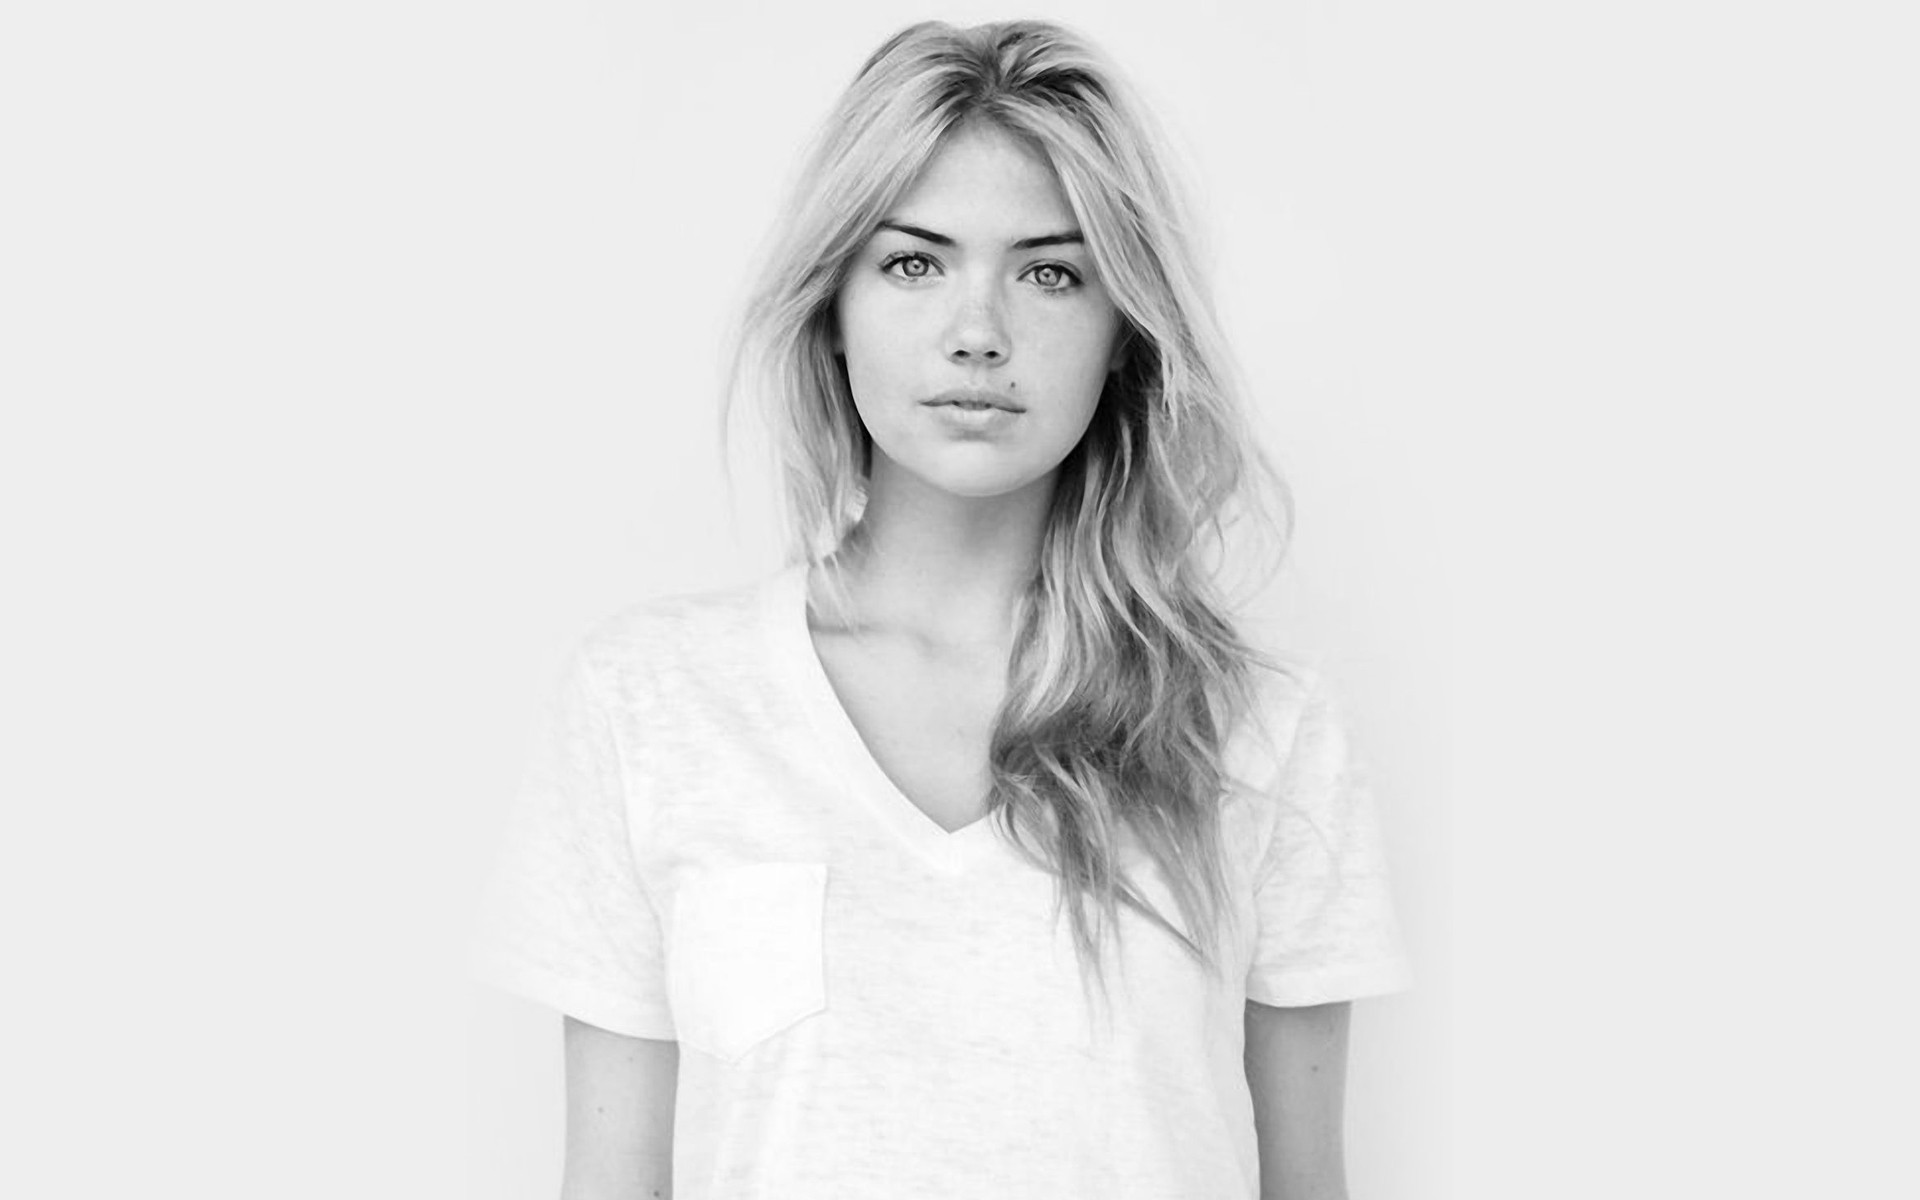 Hot Kate Upton Image And Wallpaper Collection